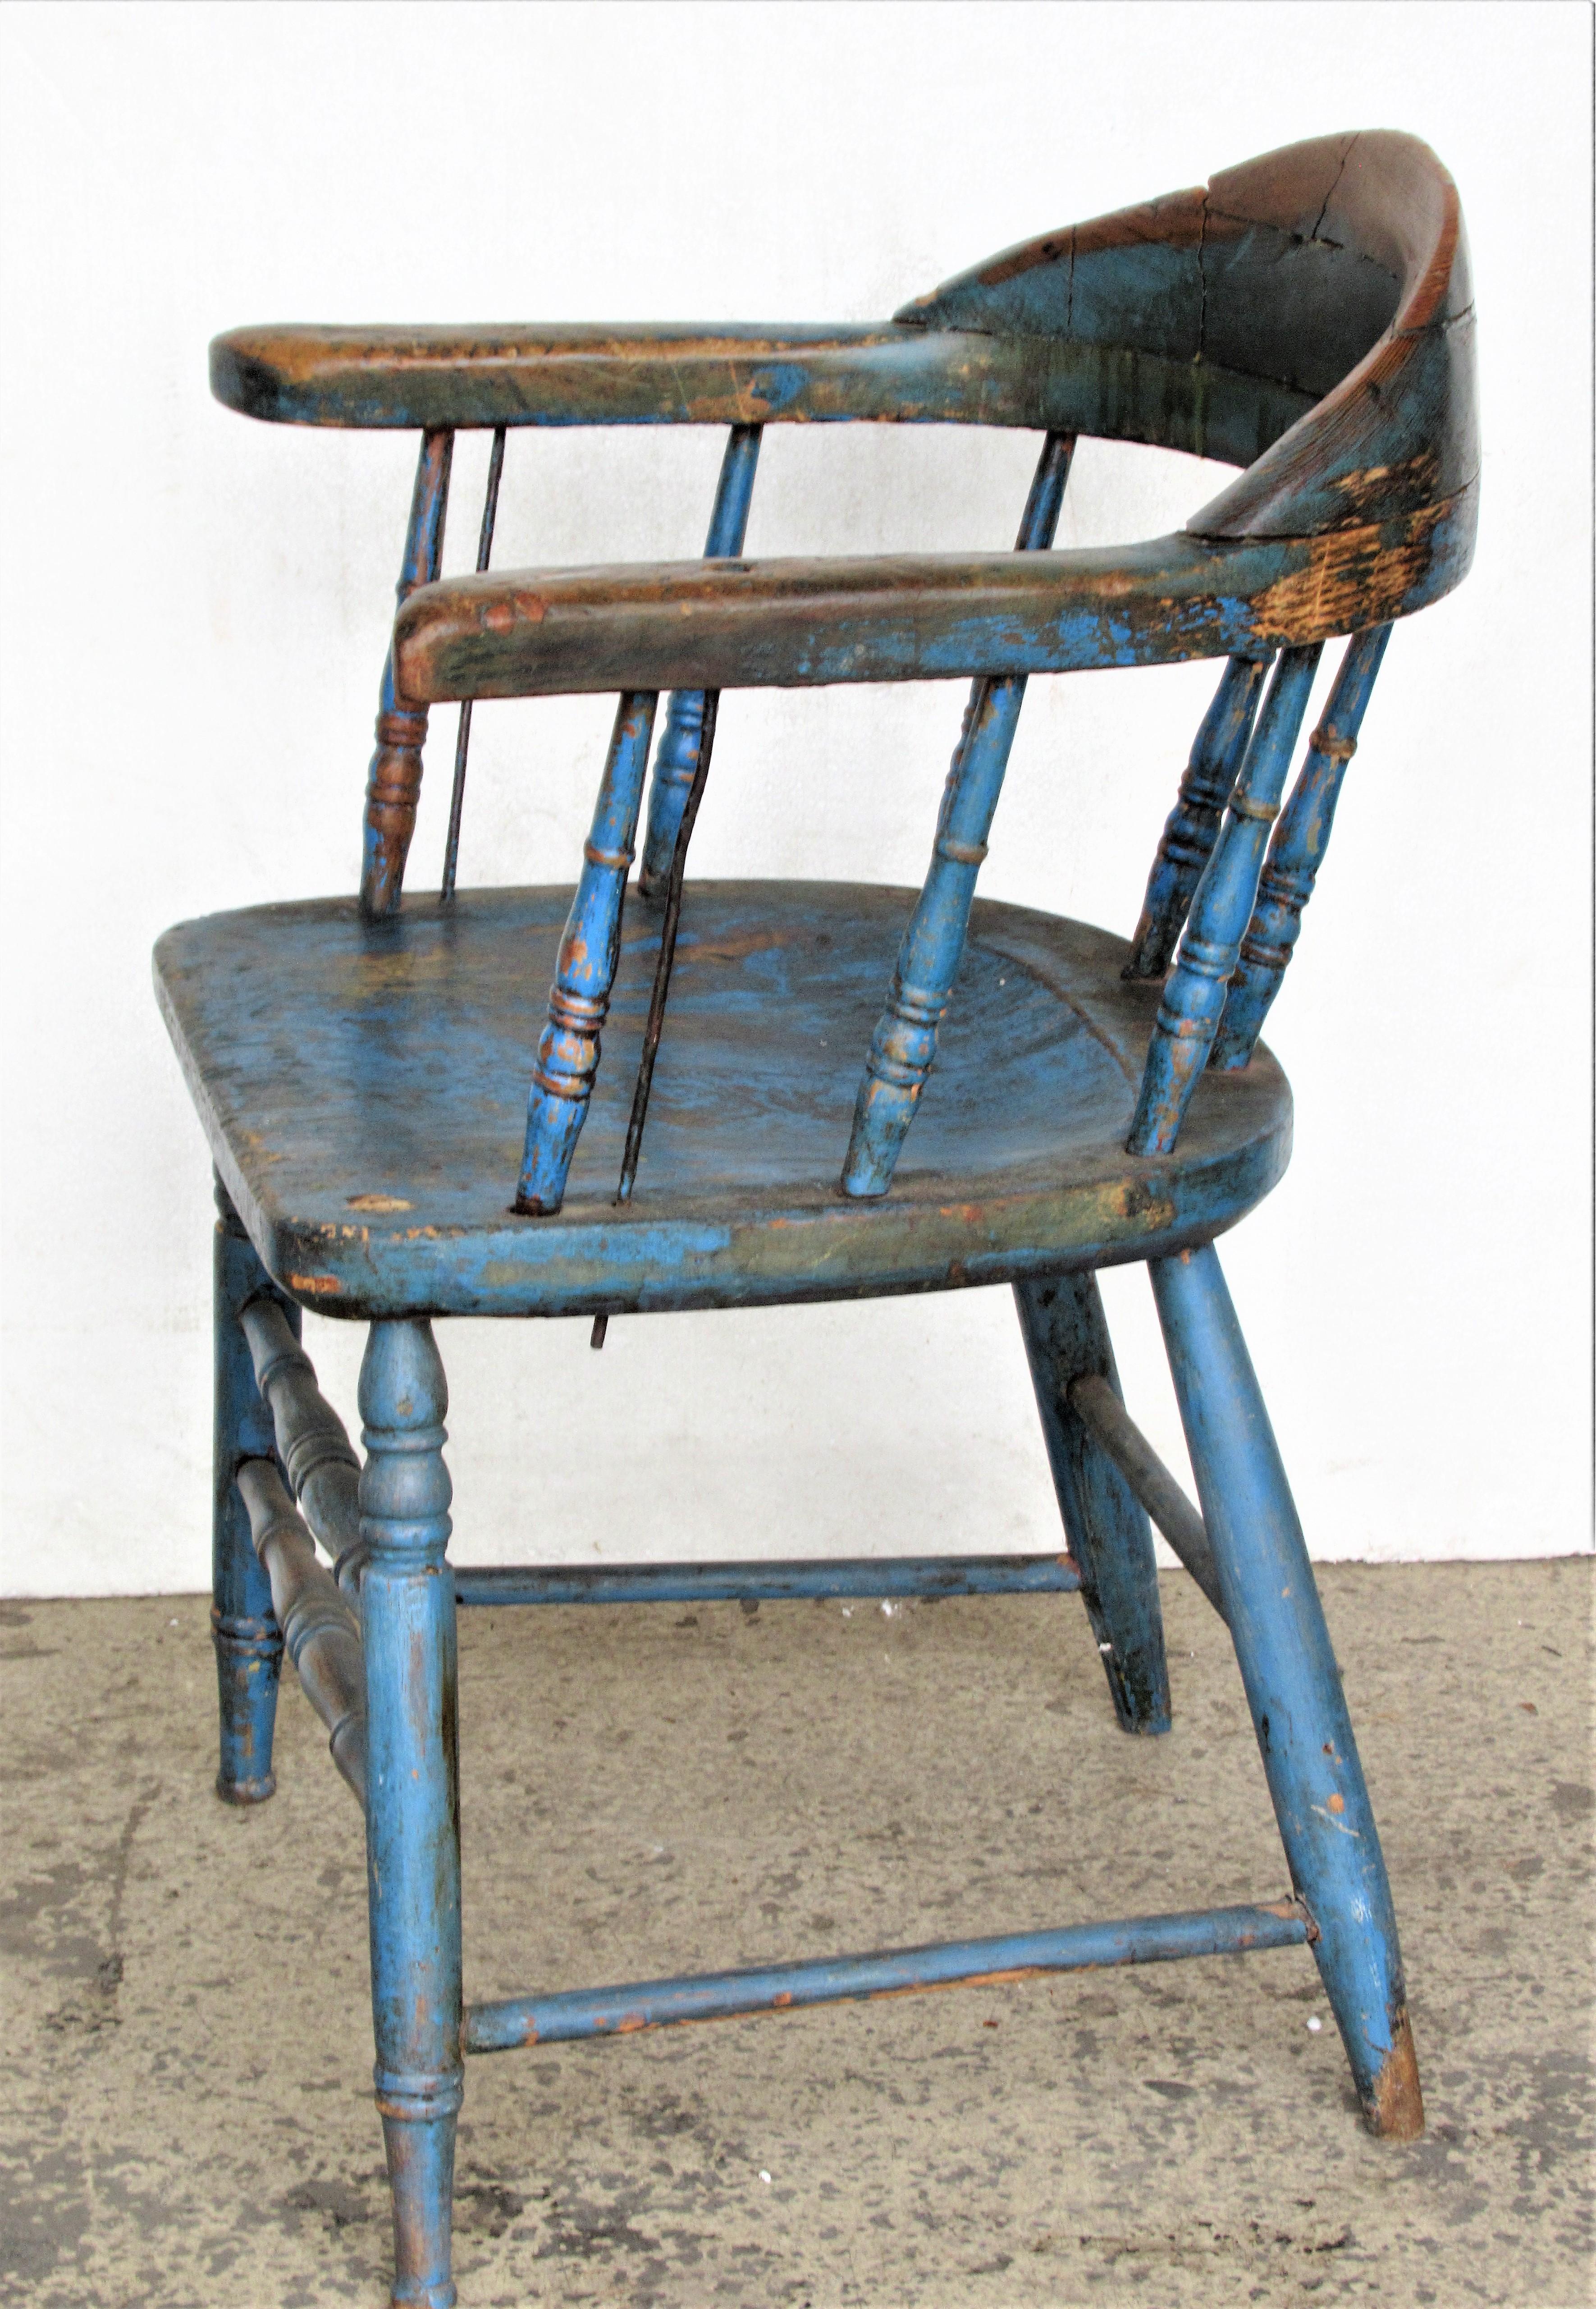 Antique American Firehouse Windsor Chair in Old Blue Paint 1